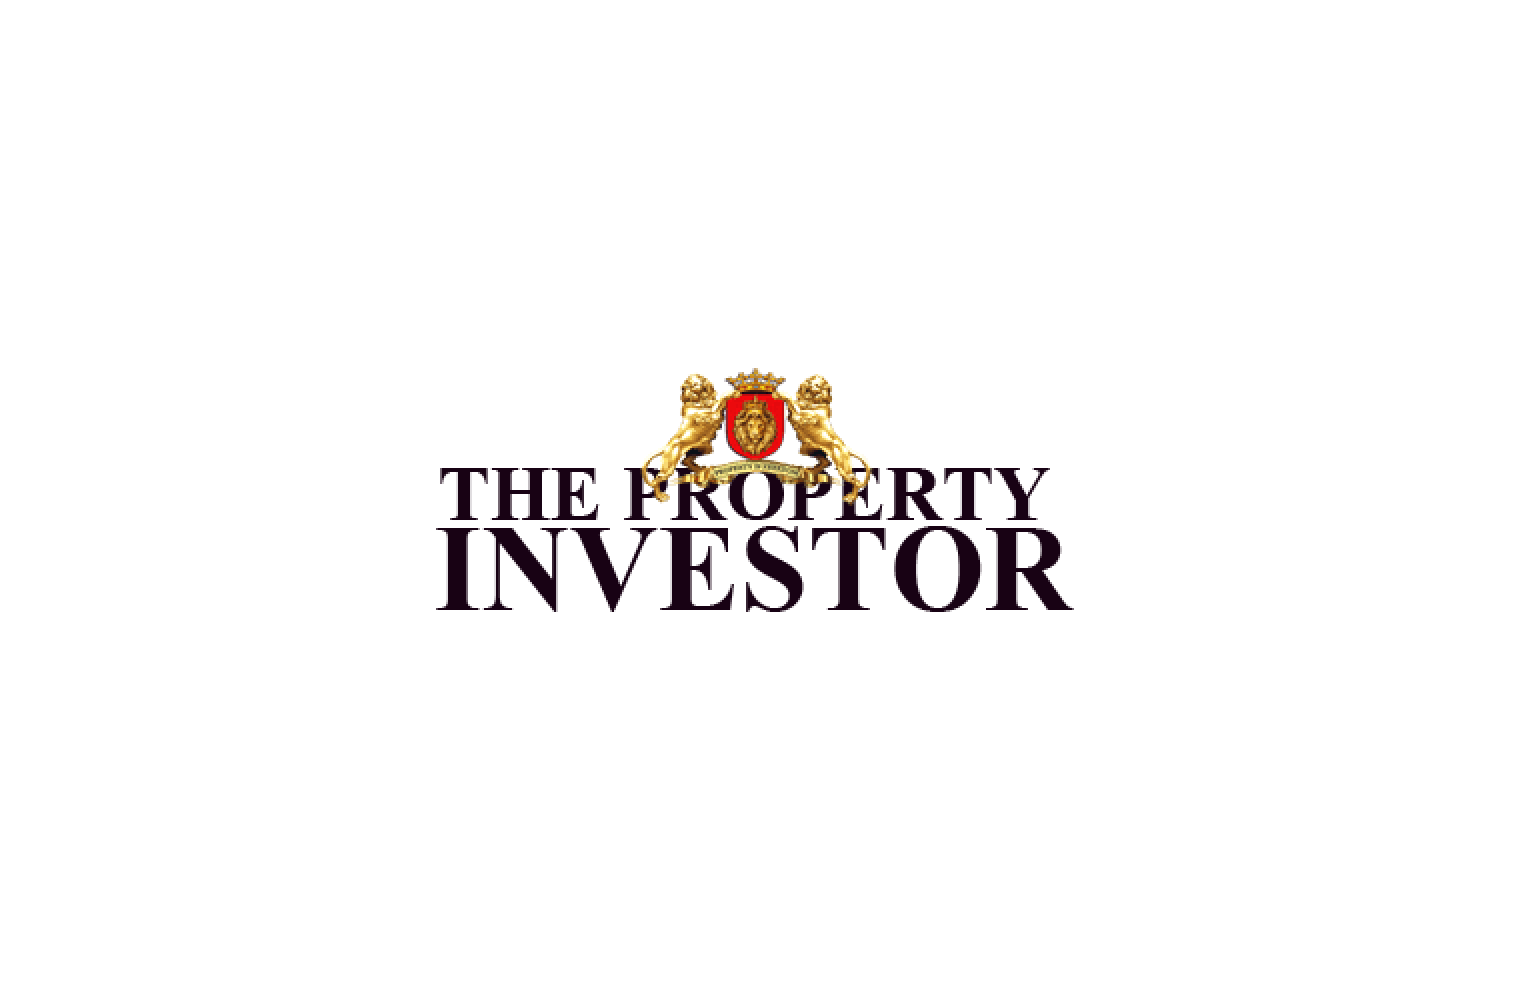 The Property Investor